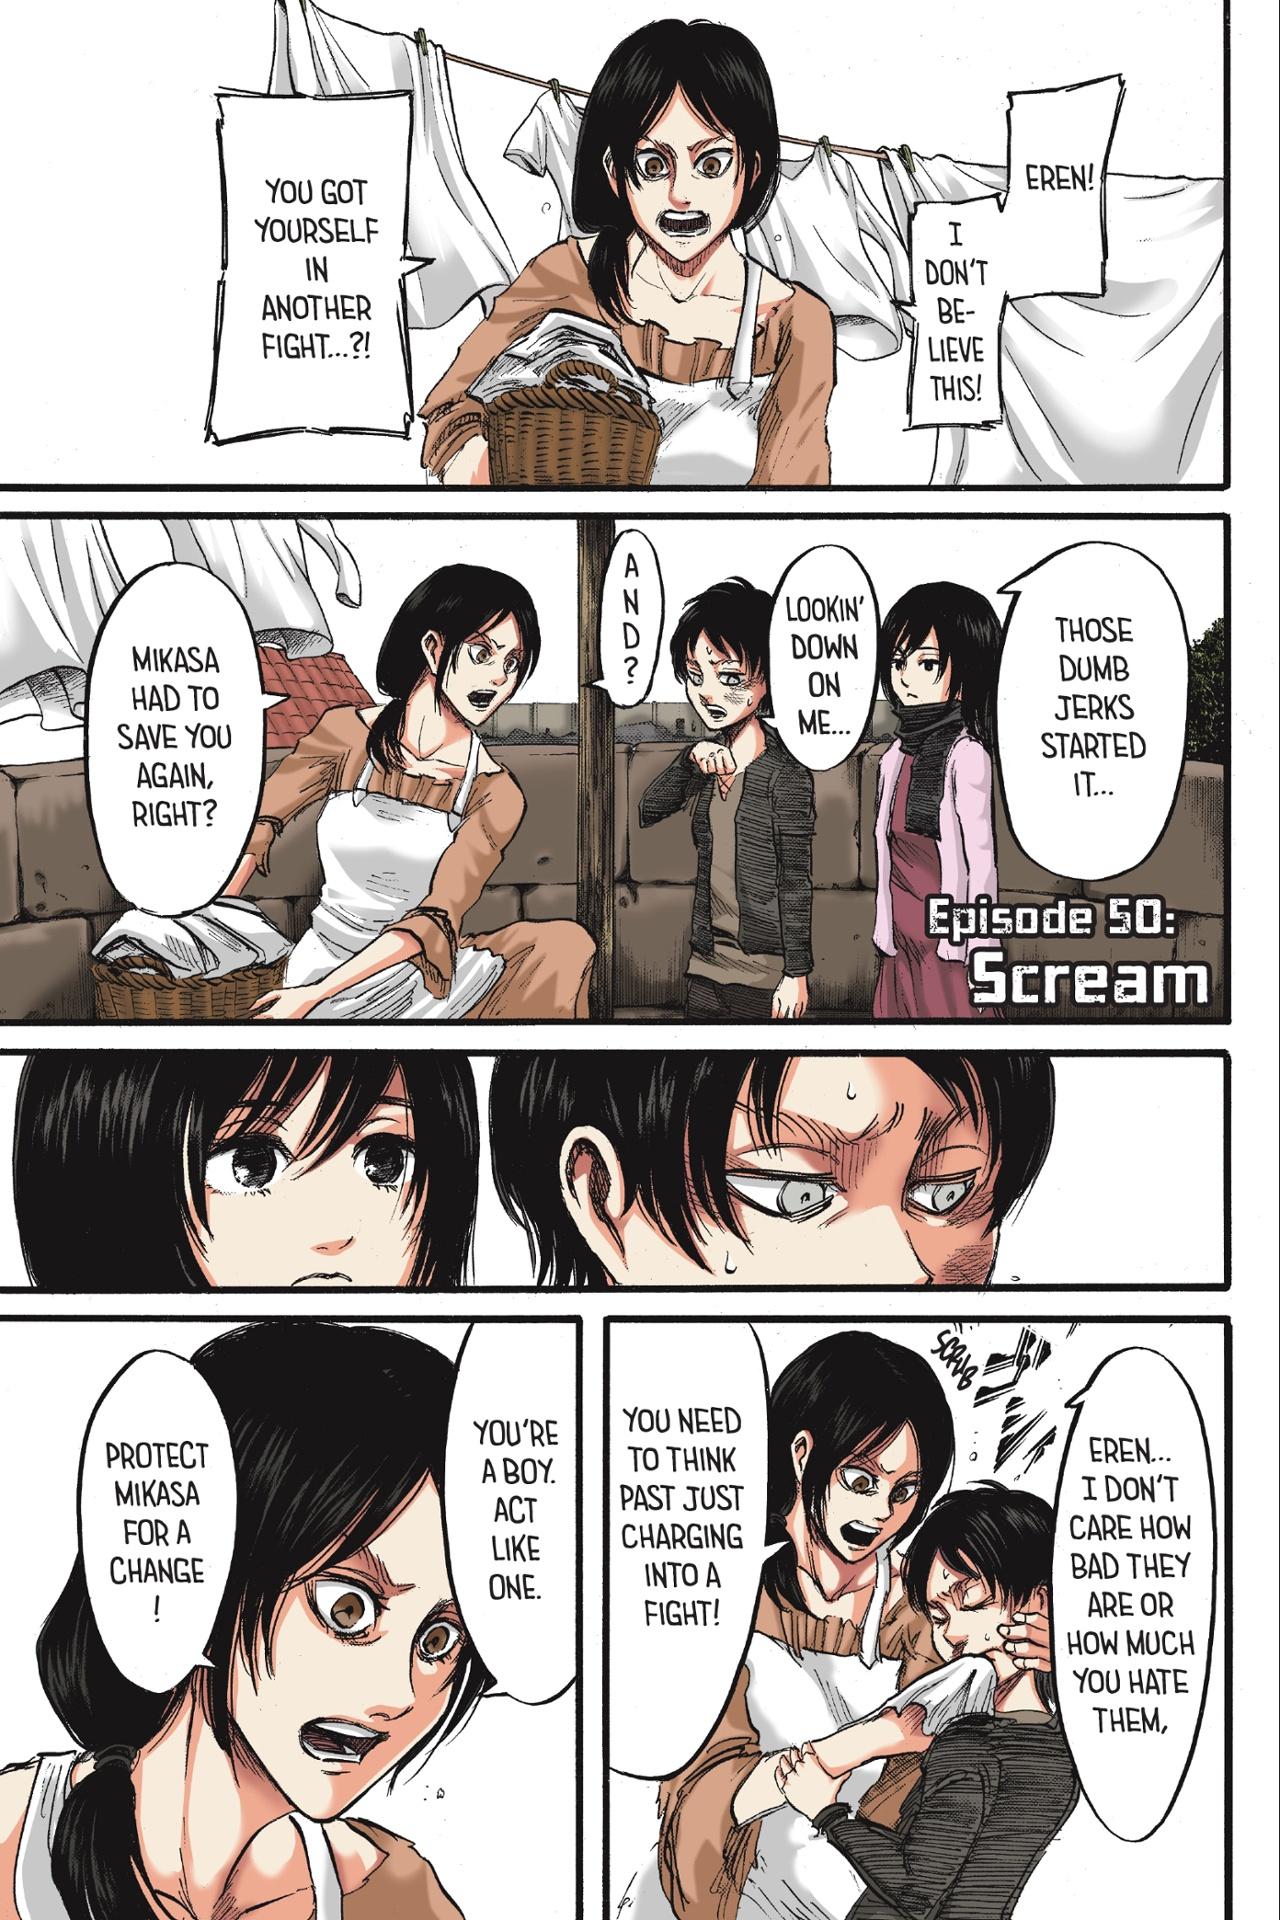 The Best Of Attack On Titan: In Color Vol. 2